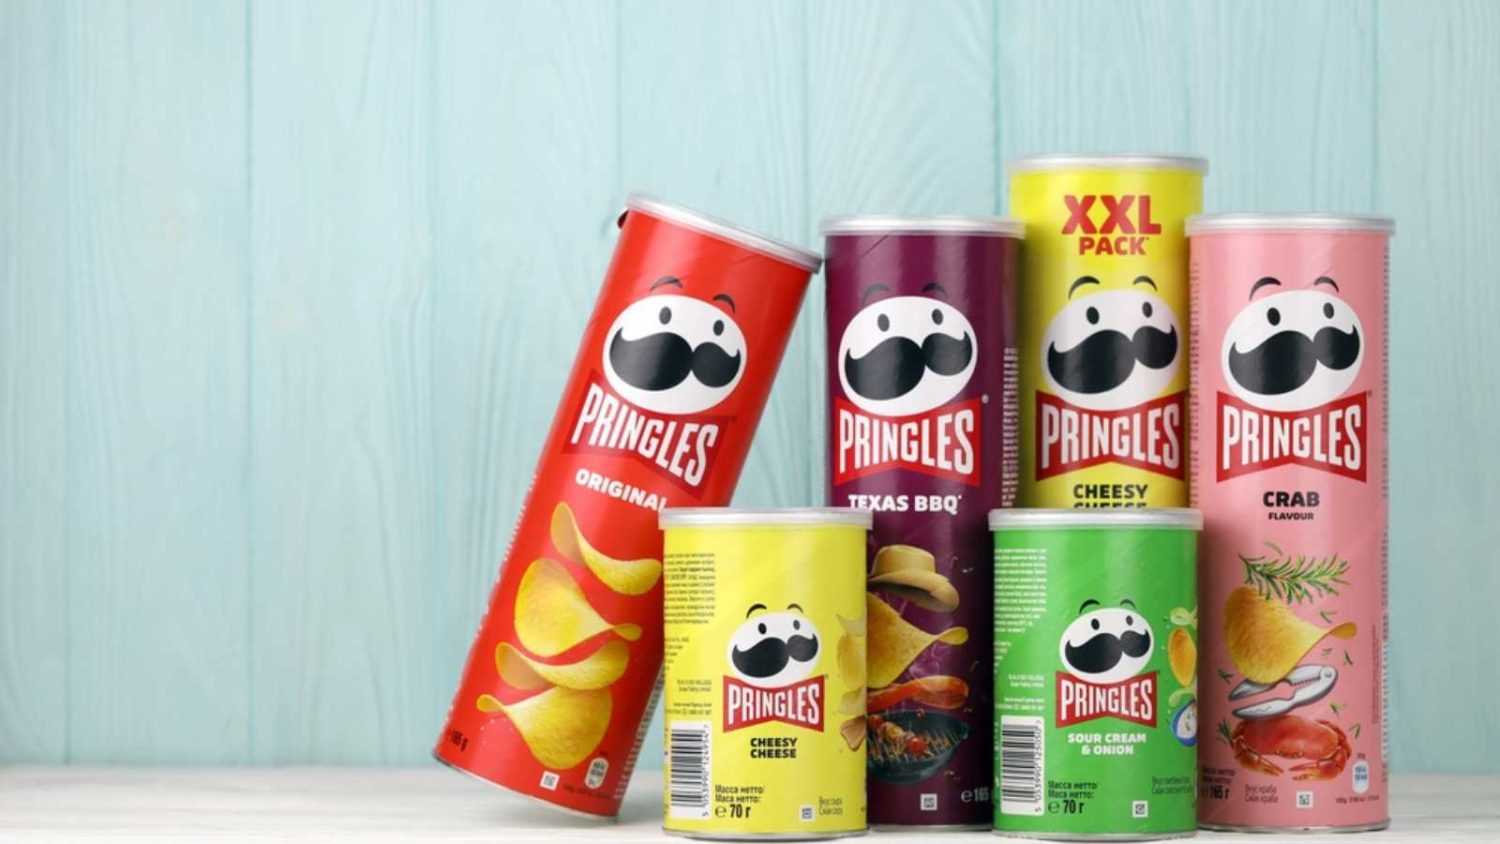 KHARKIV, UKRAINE - DECEMBER 16, 2021: Pringles production with new logo. Pringles is a brand of potato snack chips owned by the Kellogg Company